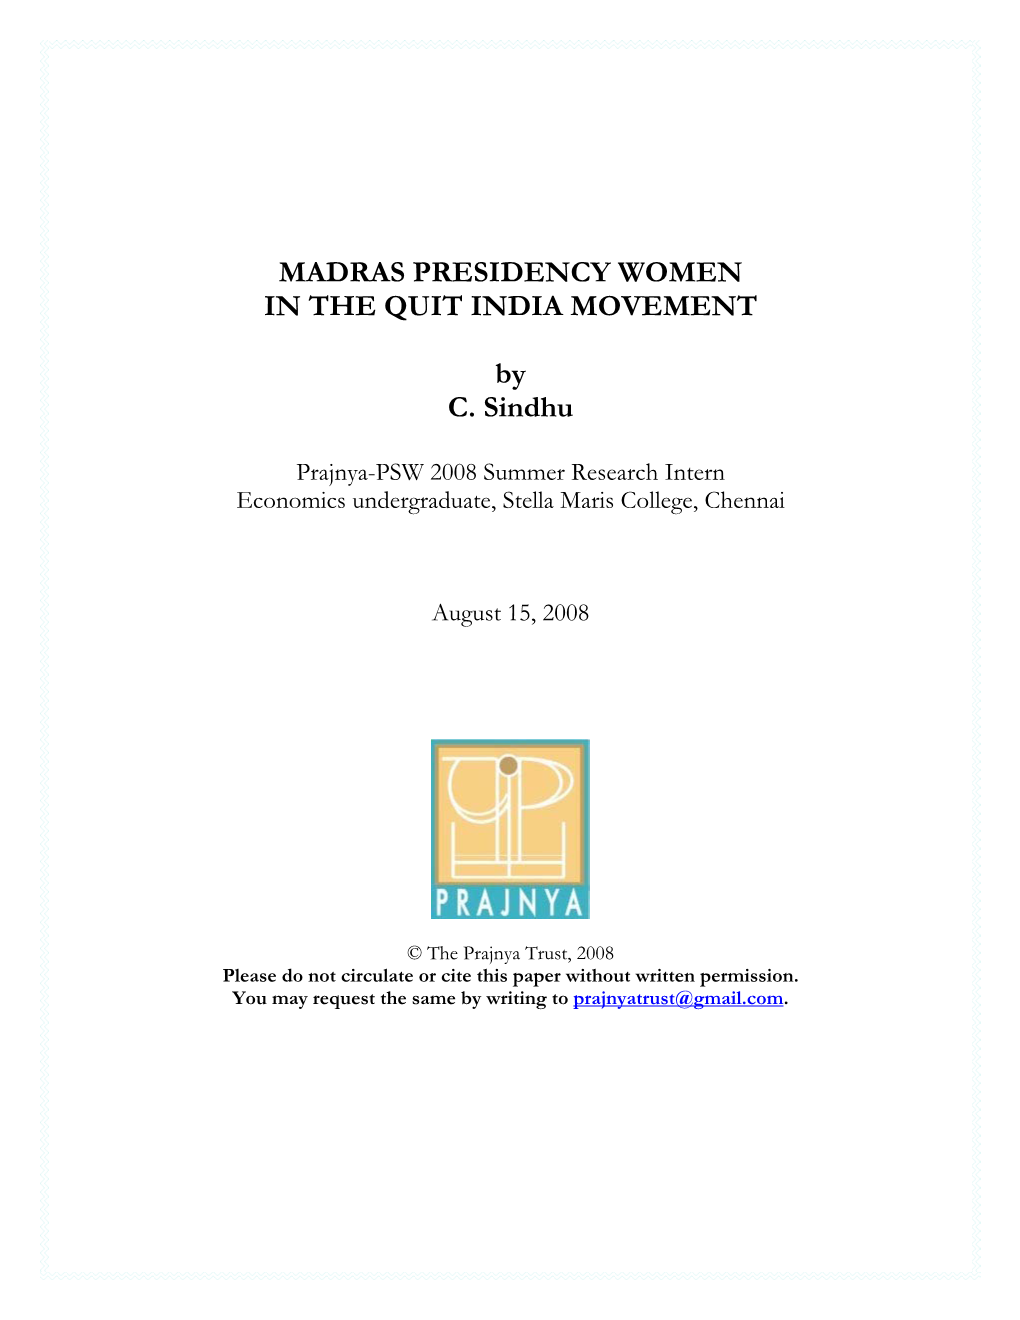 Madras Presidency Women in the Quit India Movement